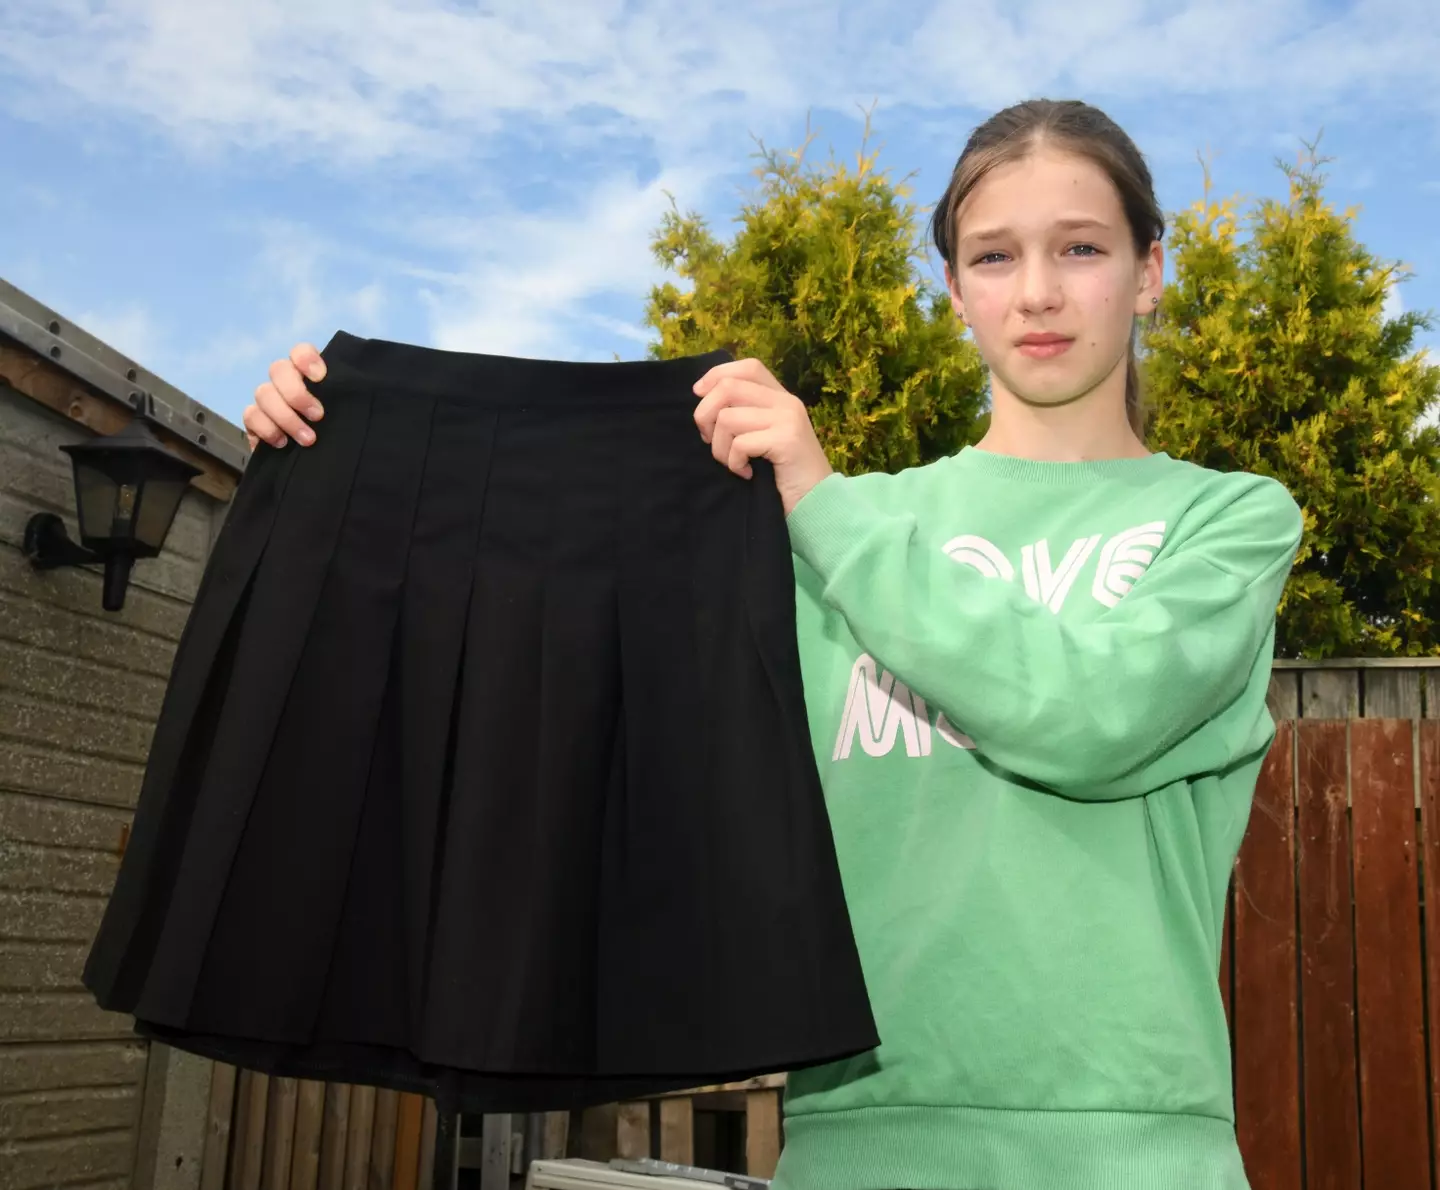 12-year-old Lilly was put in isolation after wearing a school uniform skirt from ASDA.